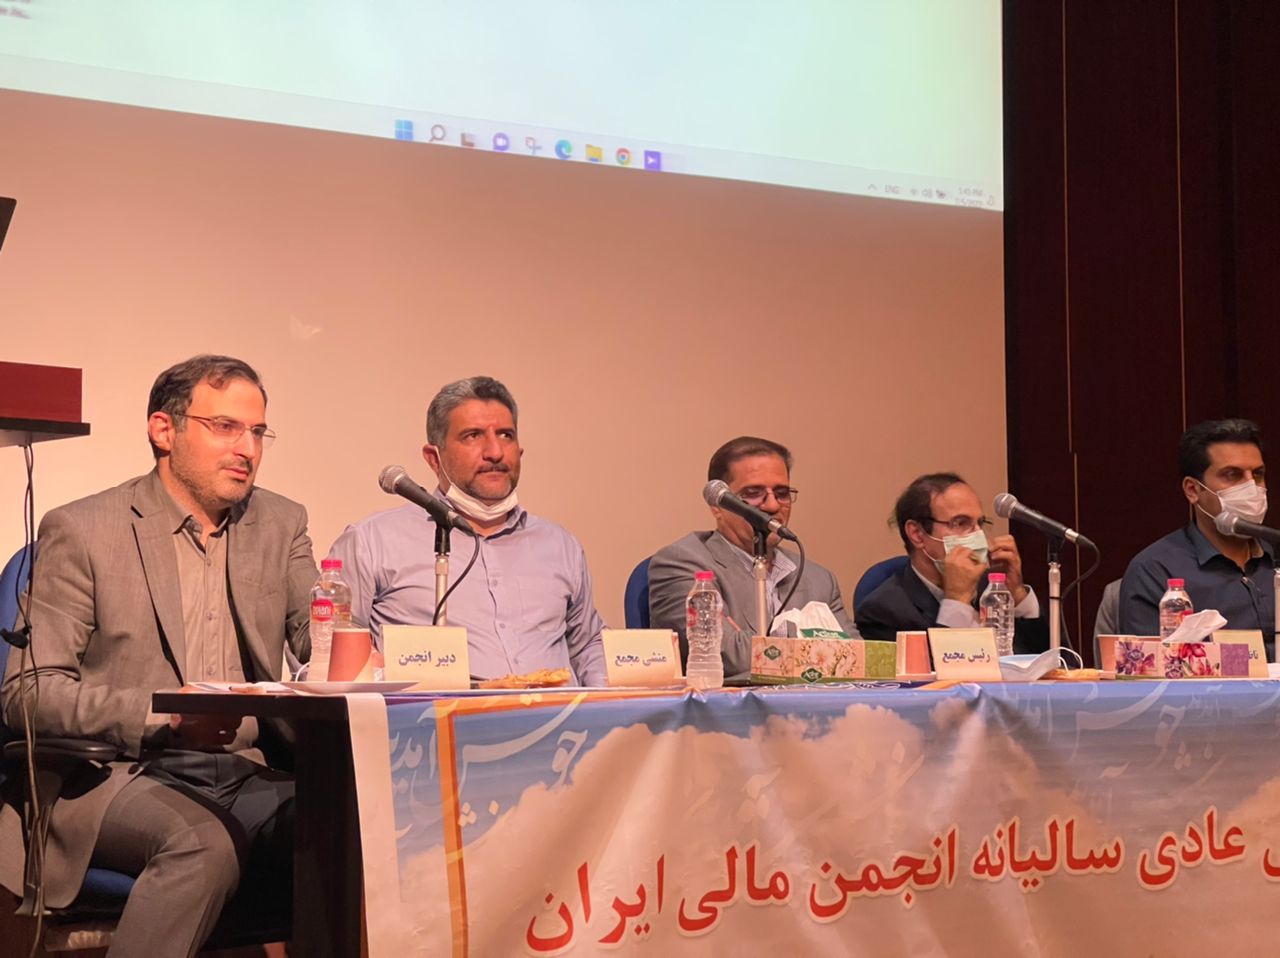 Iranian Financial Association, Isfahan branch opened in University of Isfahan